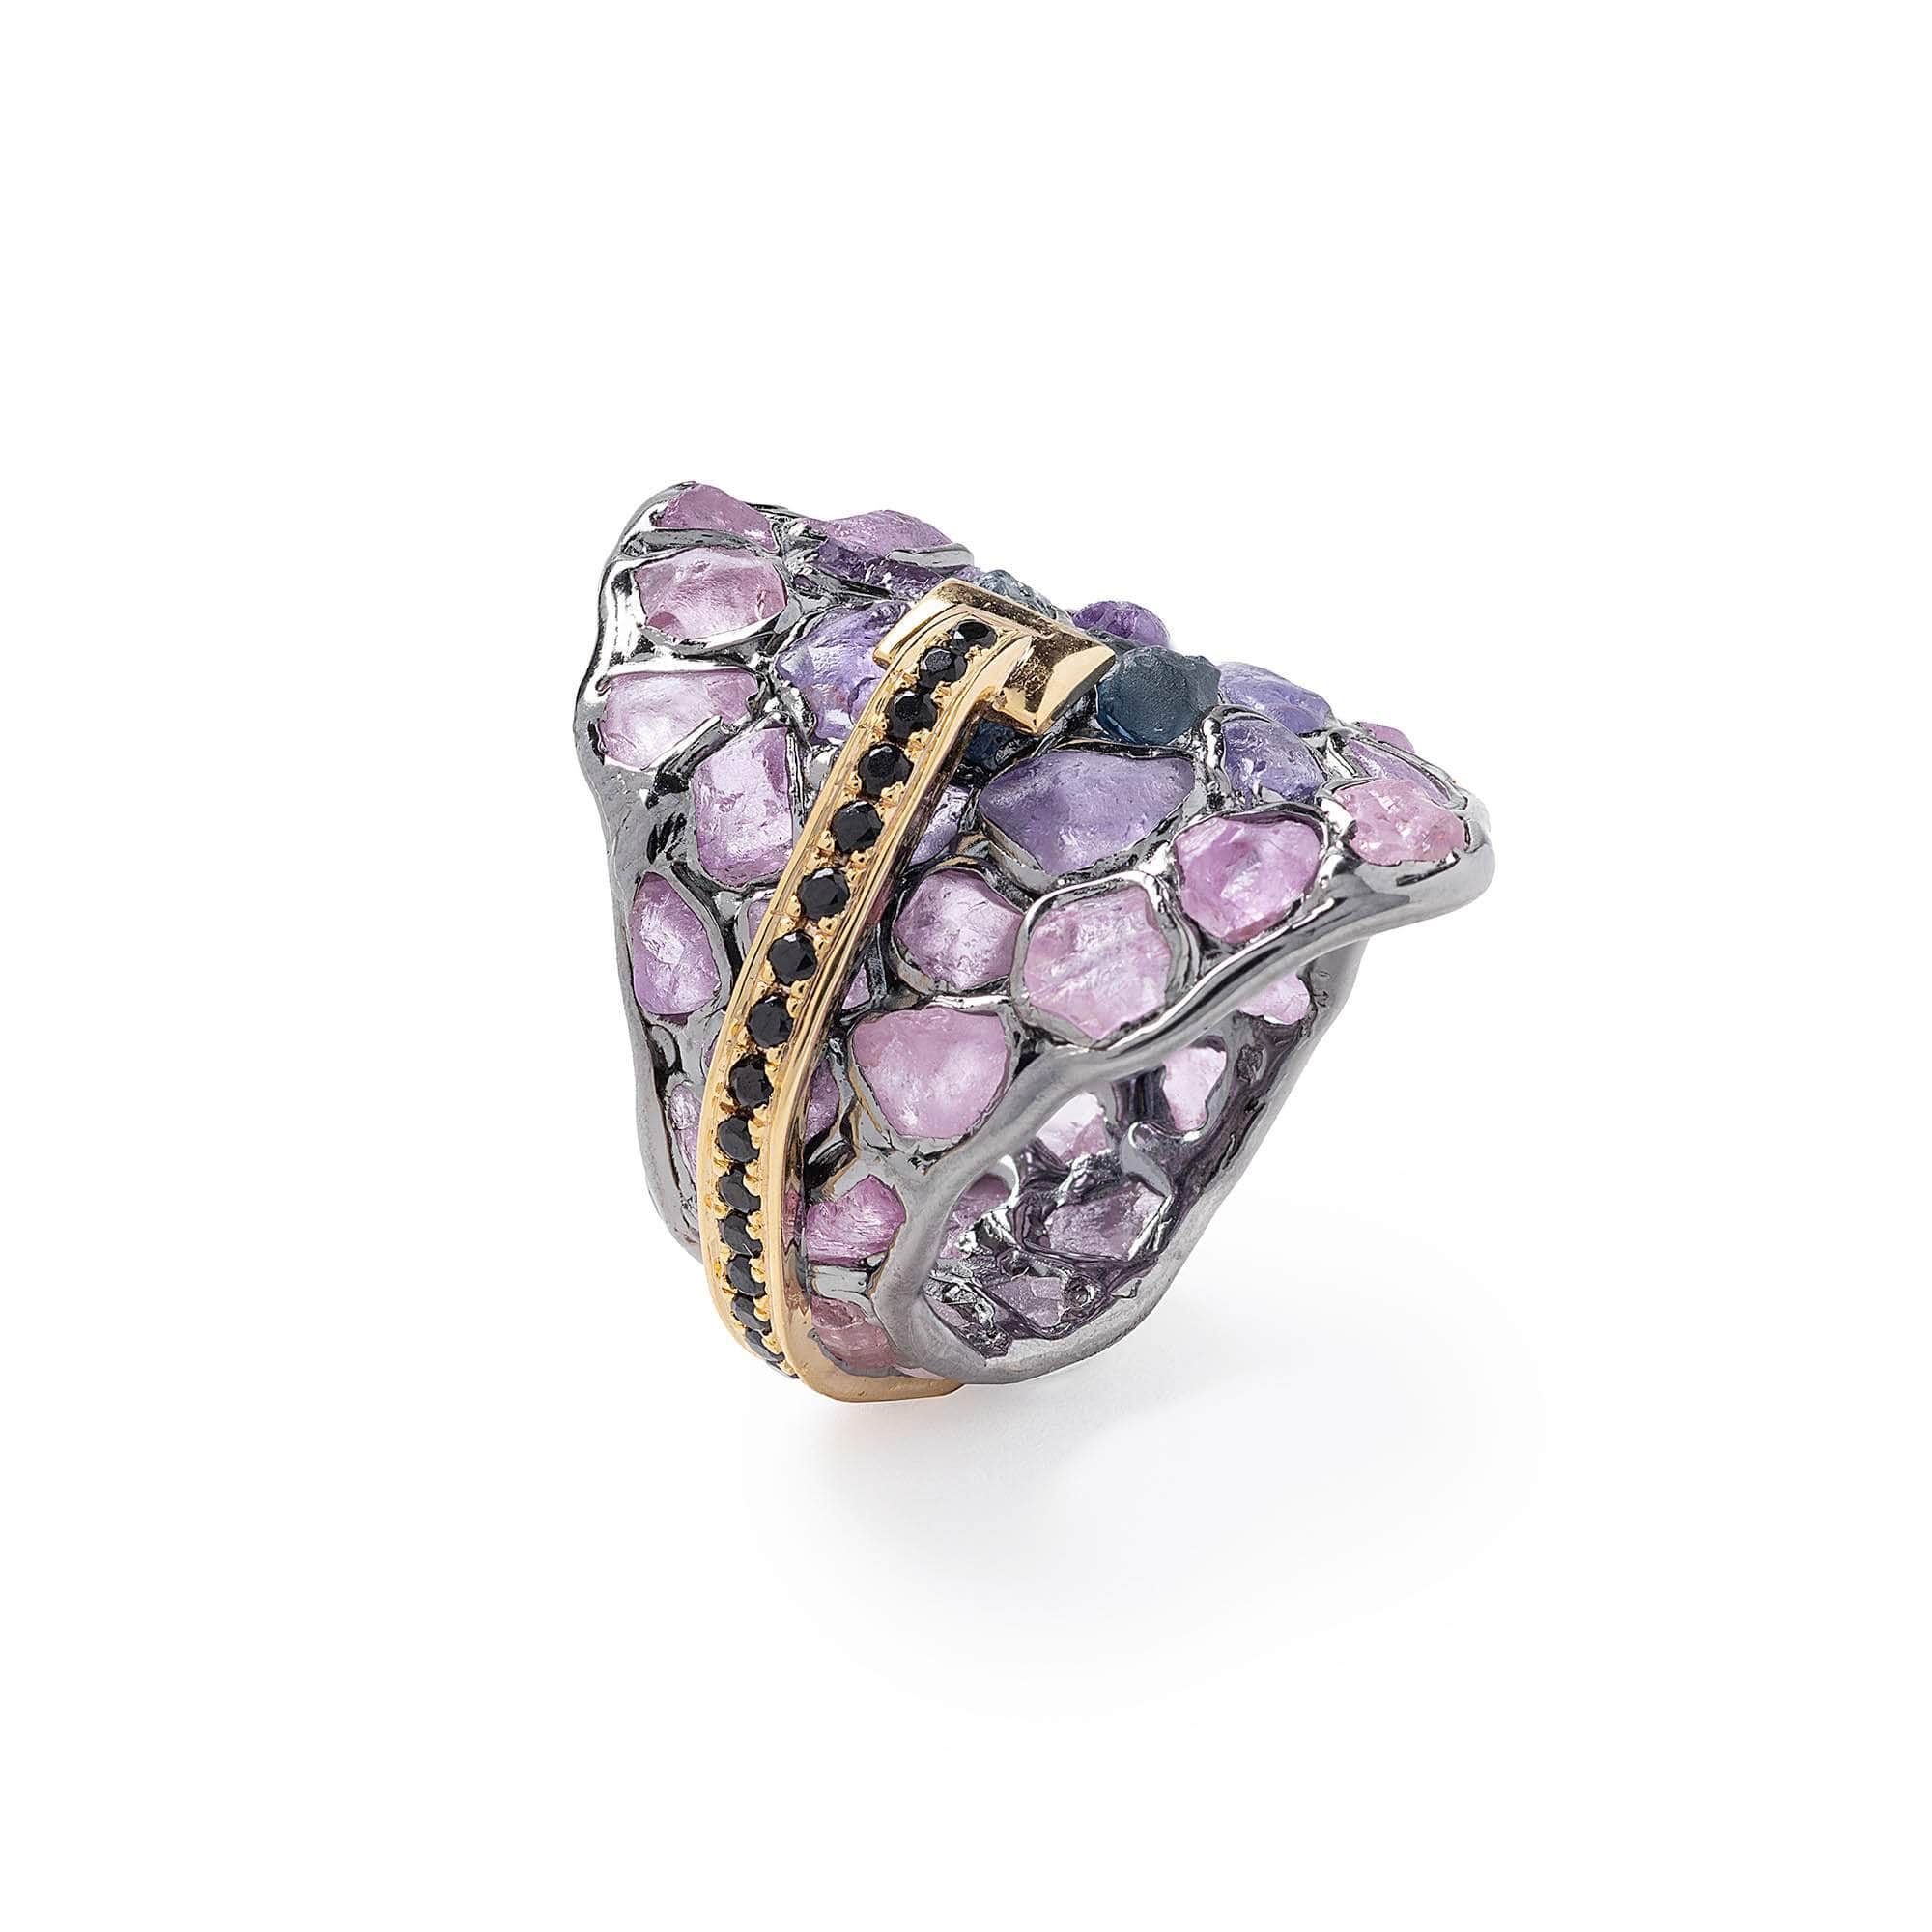 Hephae Rough Sapphire and Rough Spinel Ring GERMAN KABIRSKI